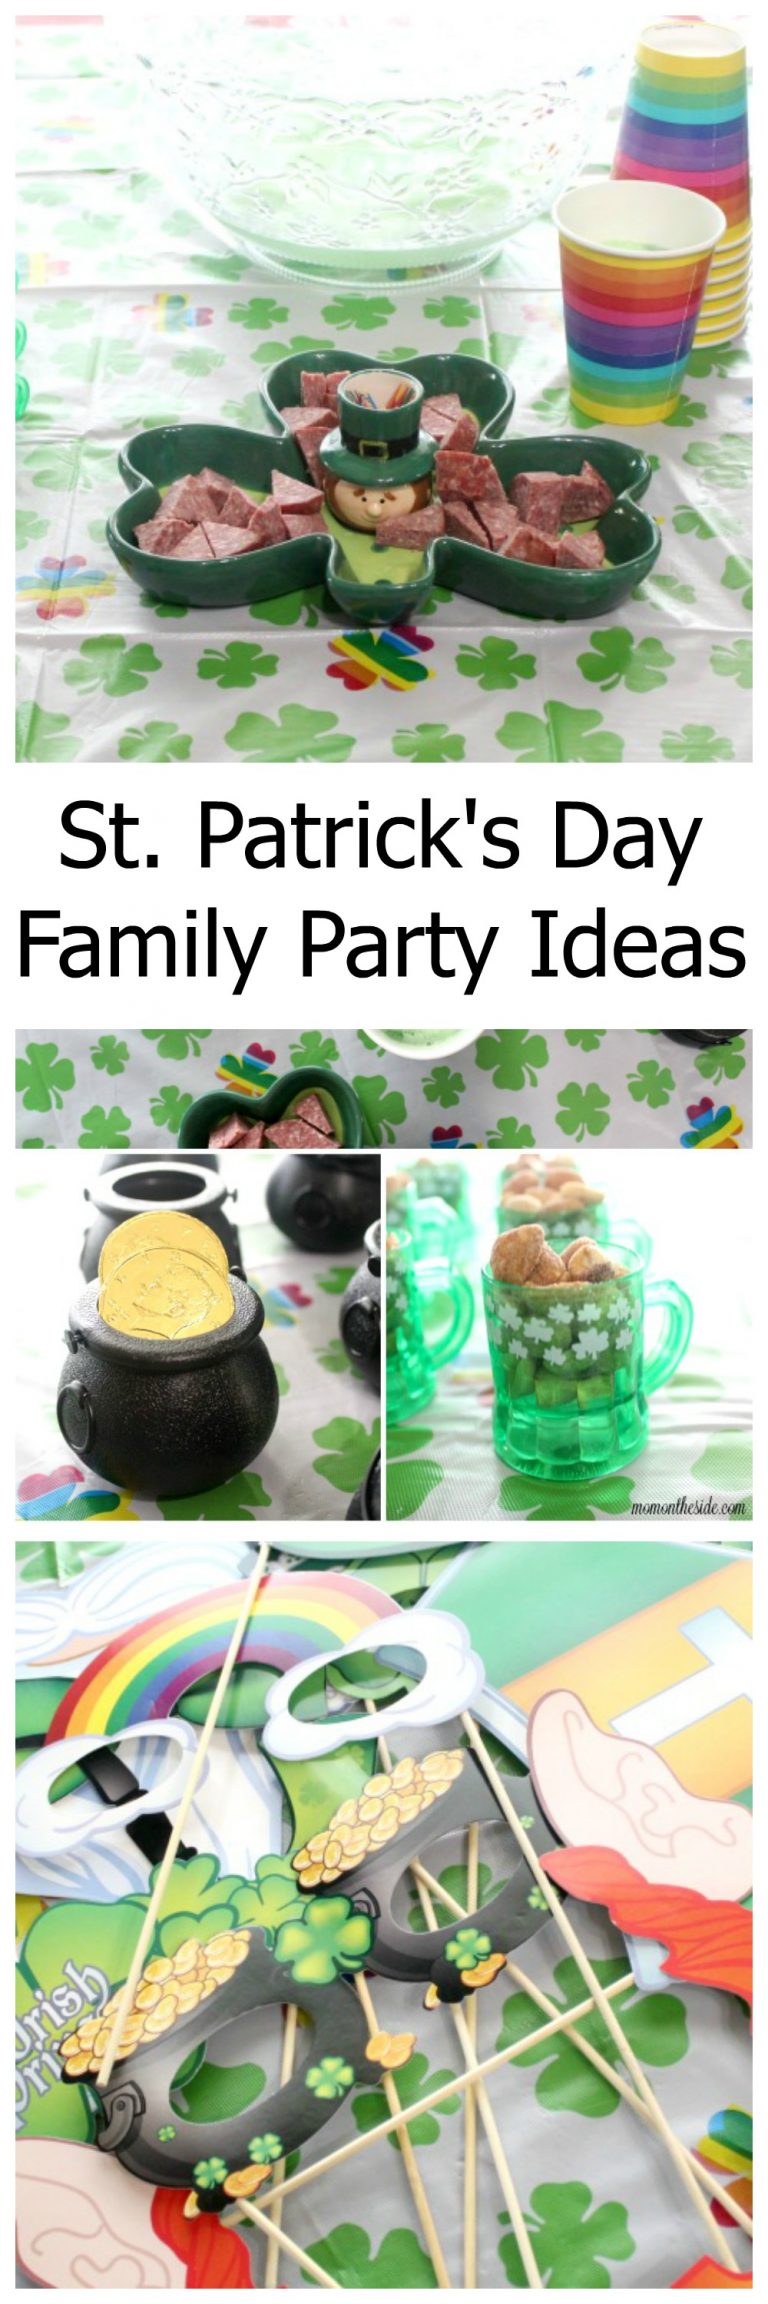 St. Patrick's Day Family Party Ideas | Mom on the Side